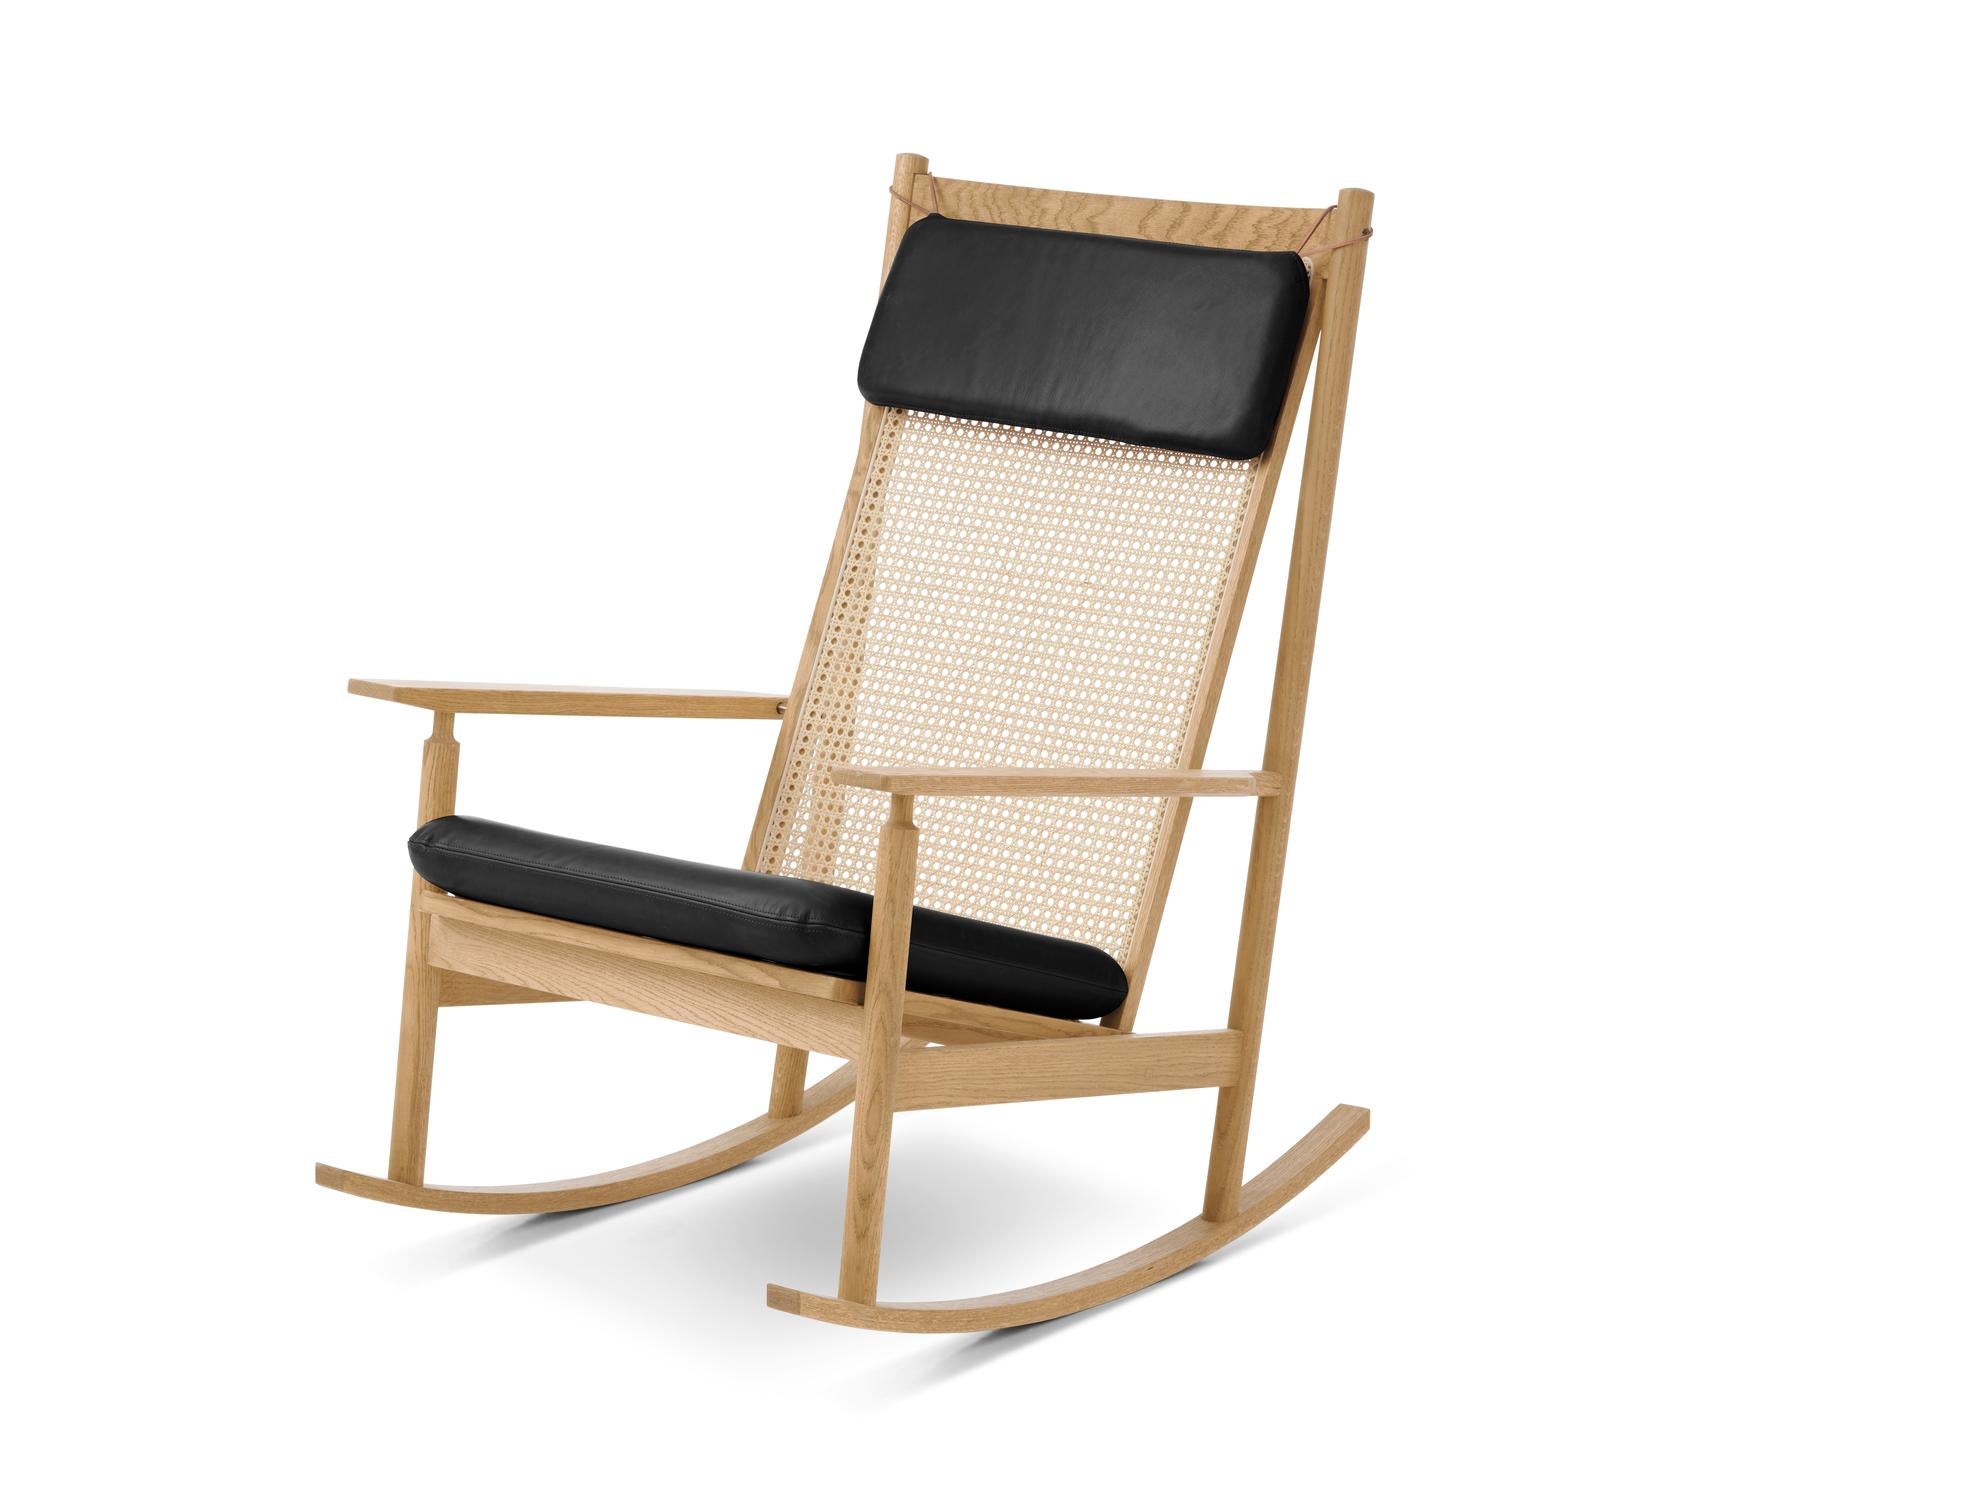 Swing Rocking Chair Nevada Oak Black Leather by Warm Nordic
Dimensions: D91 x W68 x H 103 cm
Material: Wood, Foam, Rubber springs, French cane, Textile or leather upholstery, Oak
Weight: 16.5 kg
Also available in different colours, materials and